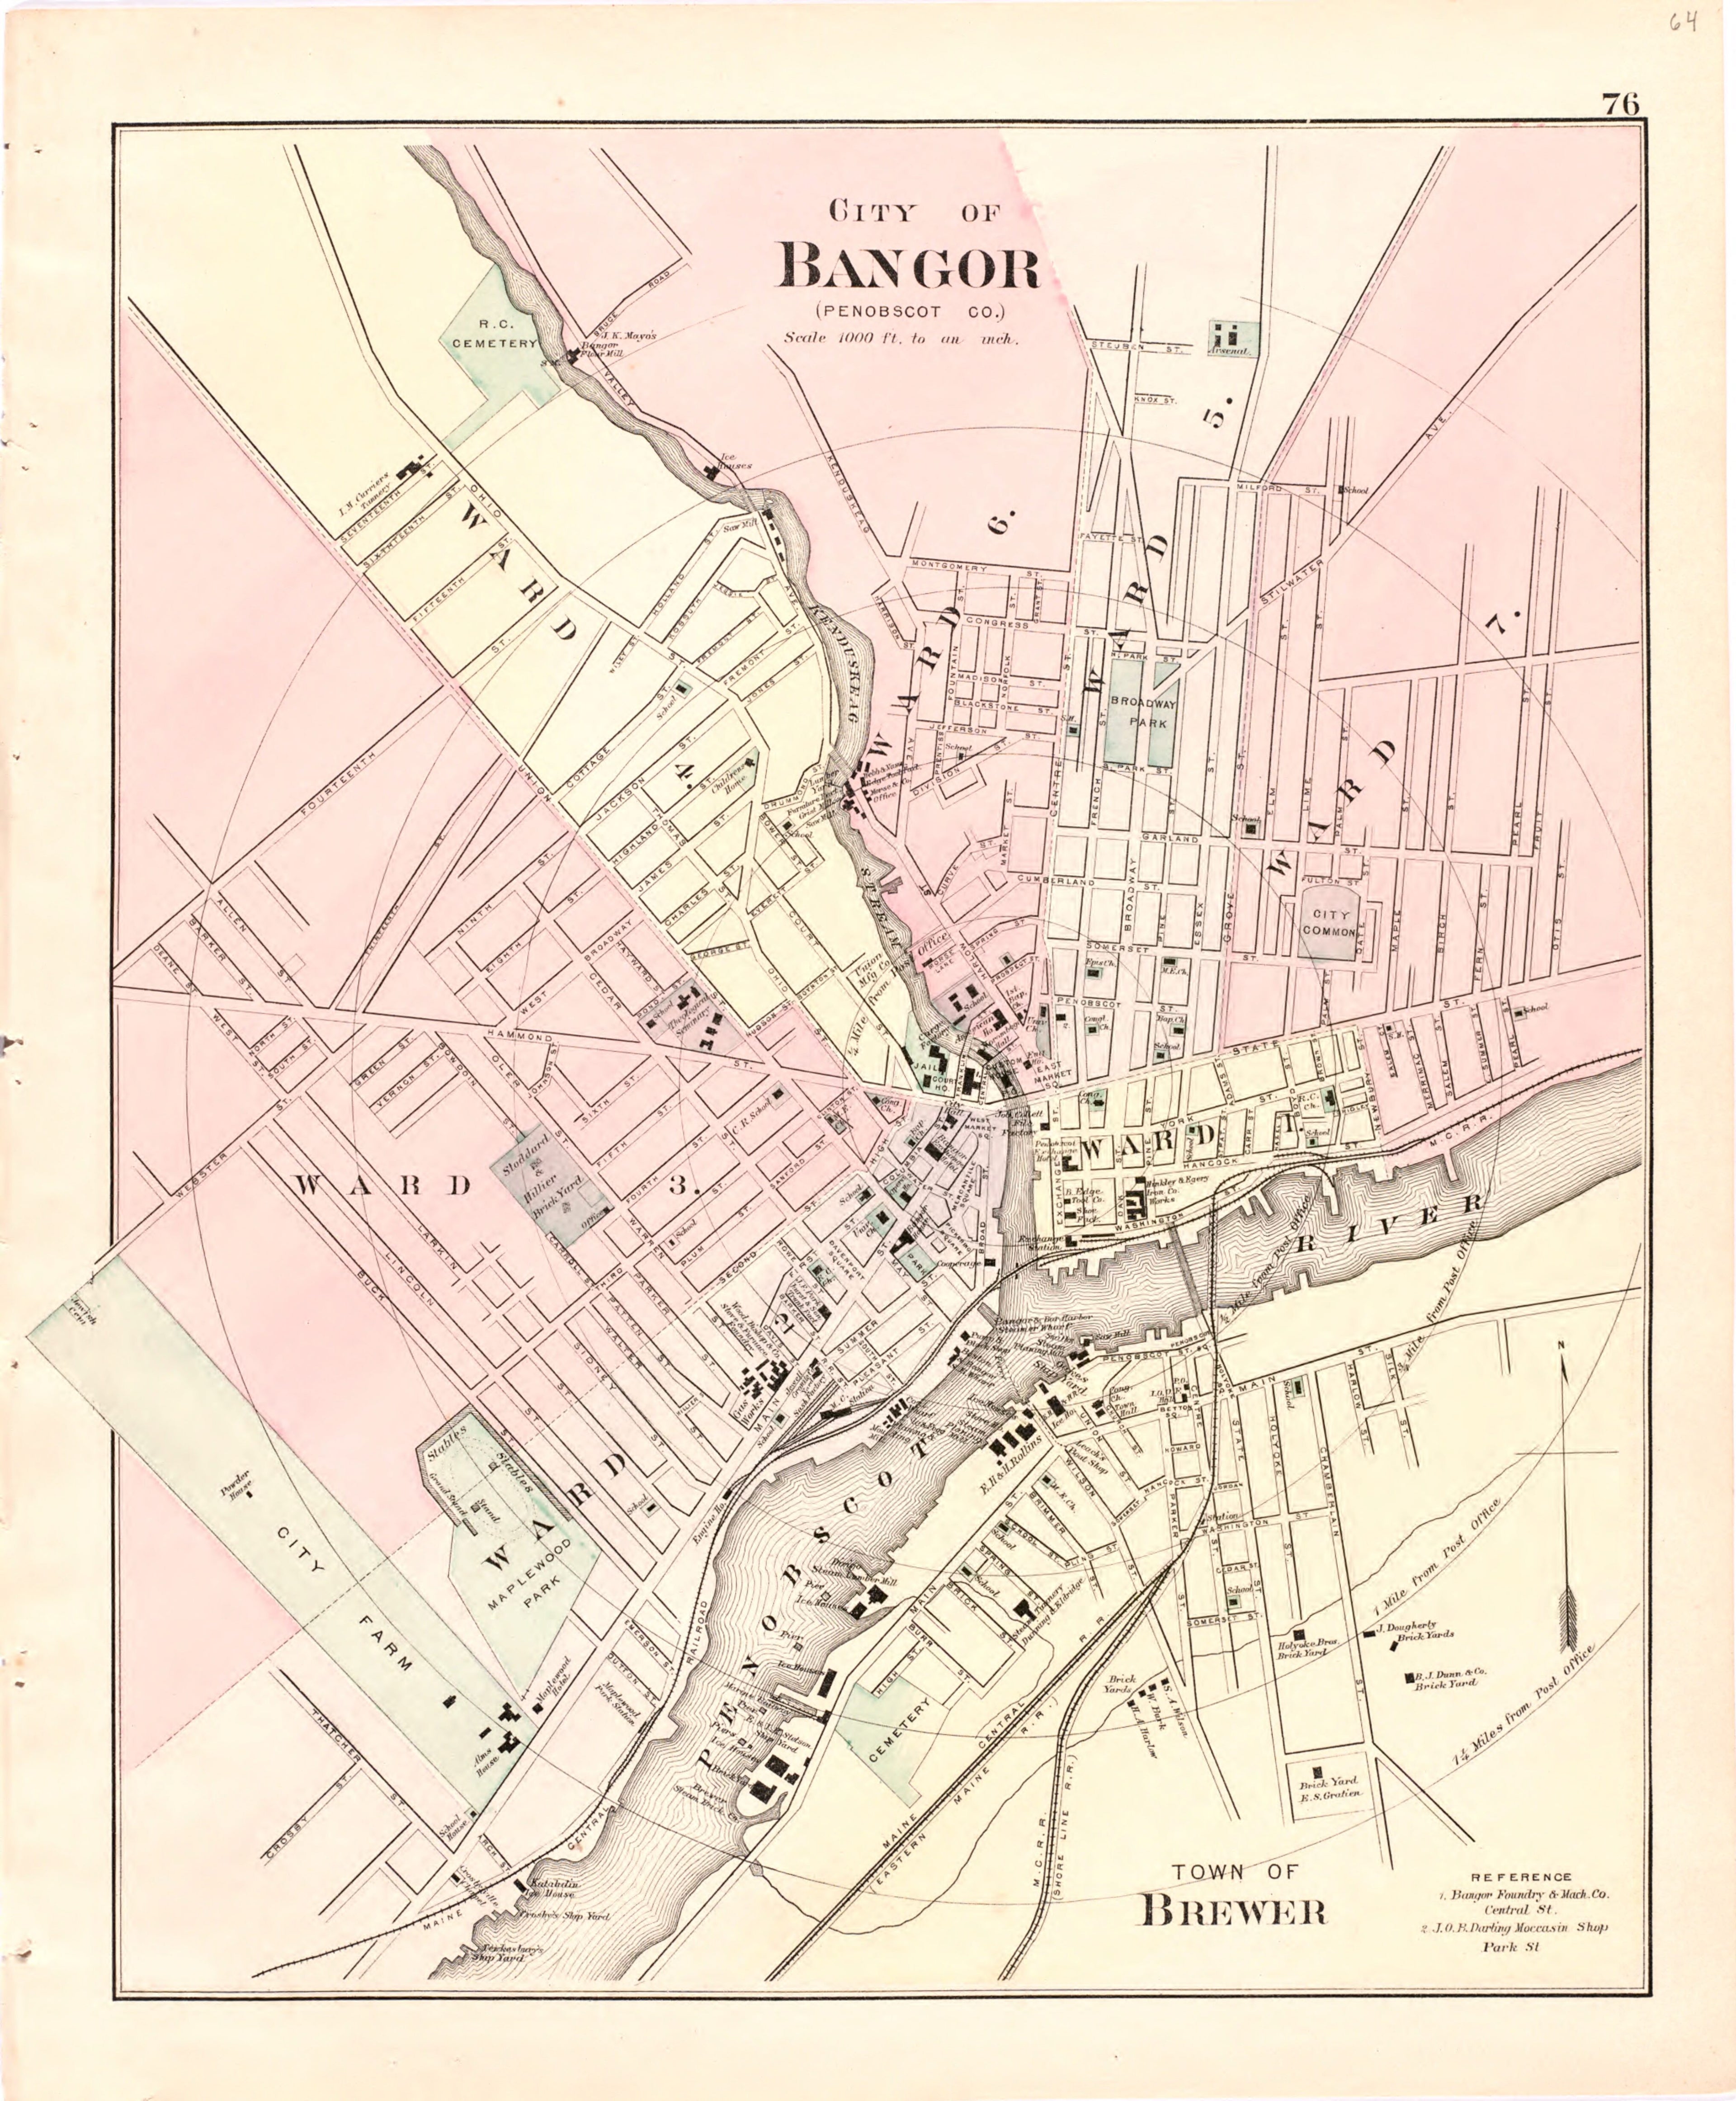 This hand drawn illustration (map) of City of Bangor from Colby&